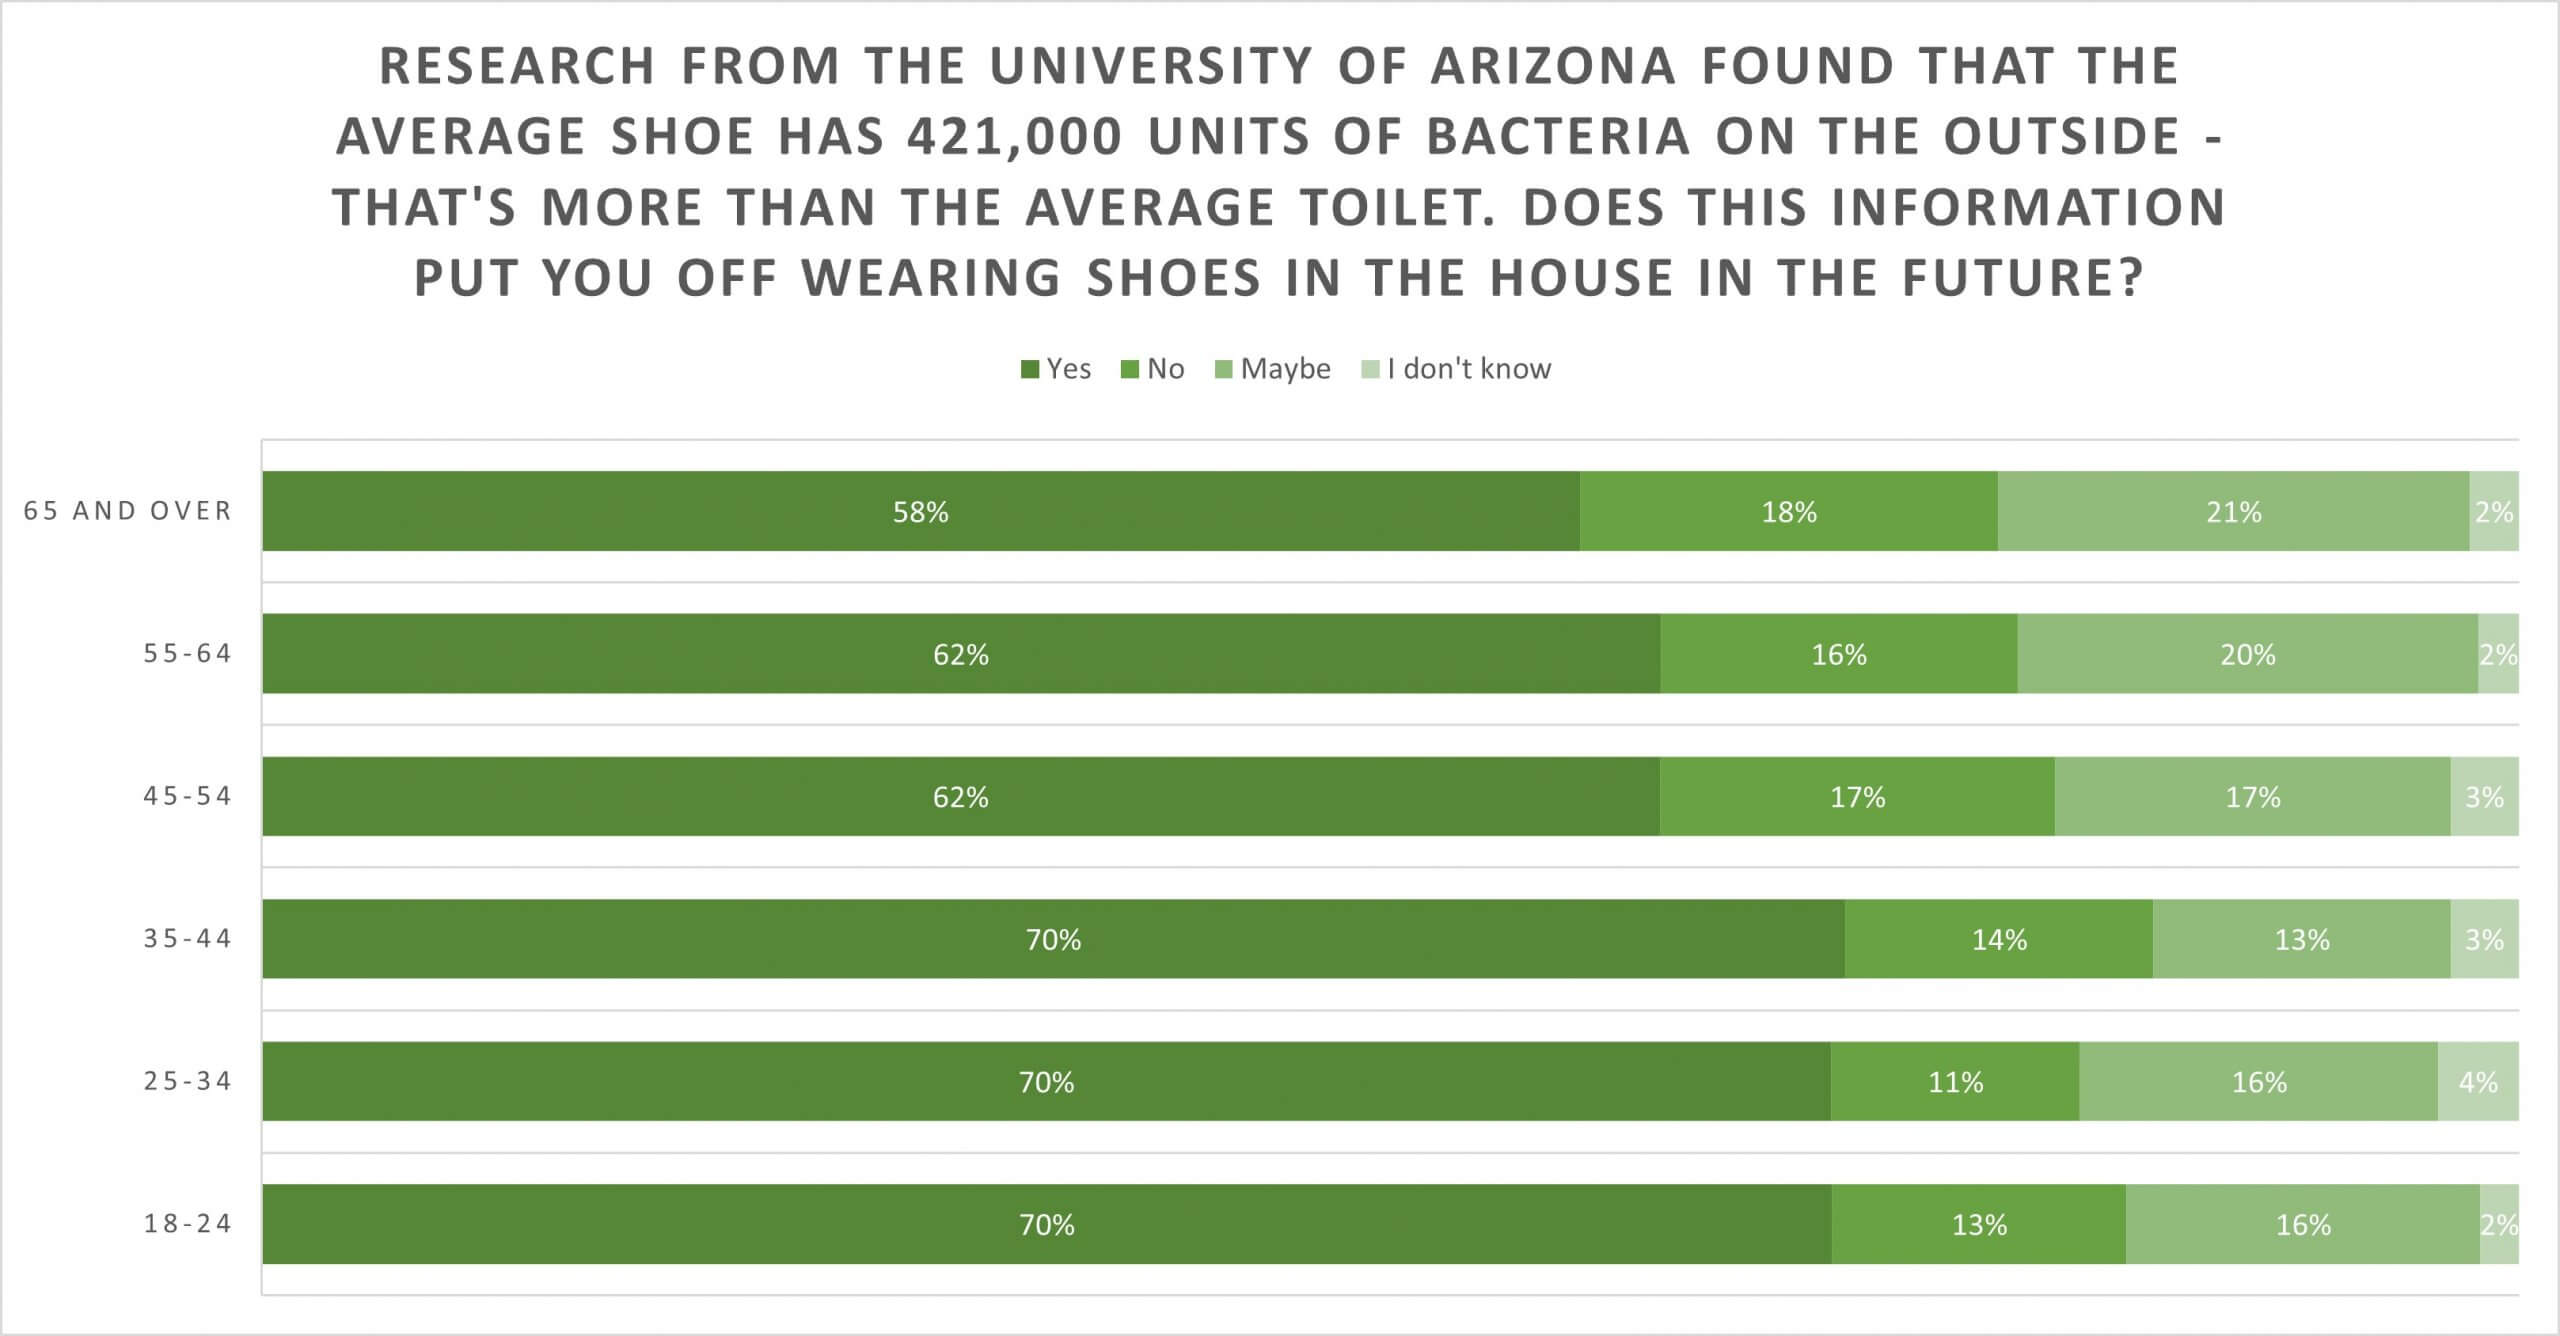 Graph displaying shoes worn in house by age group